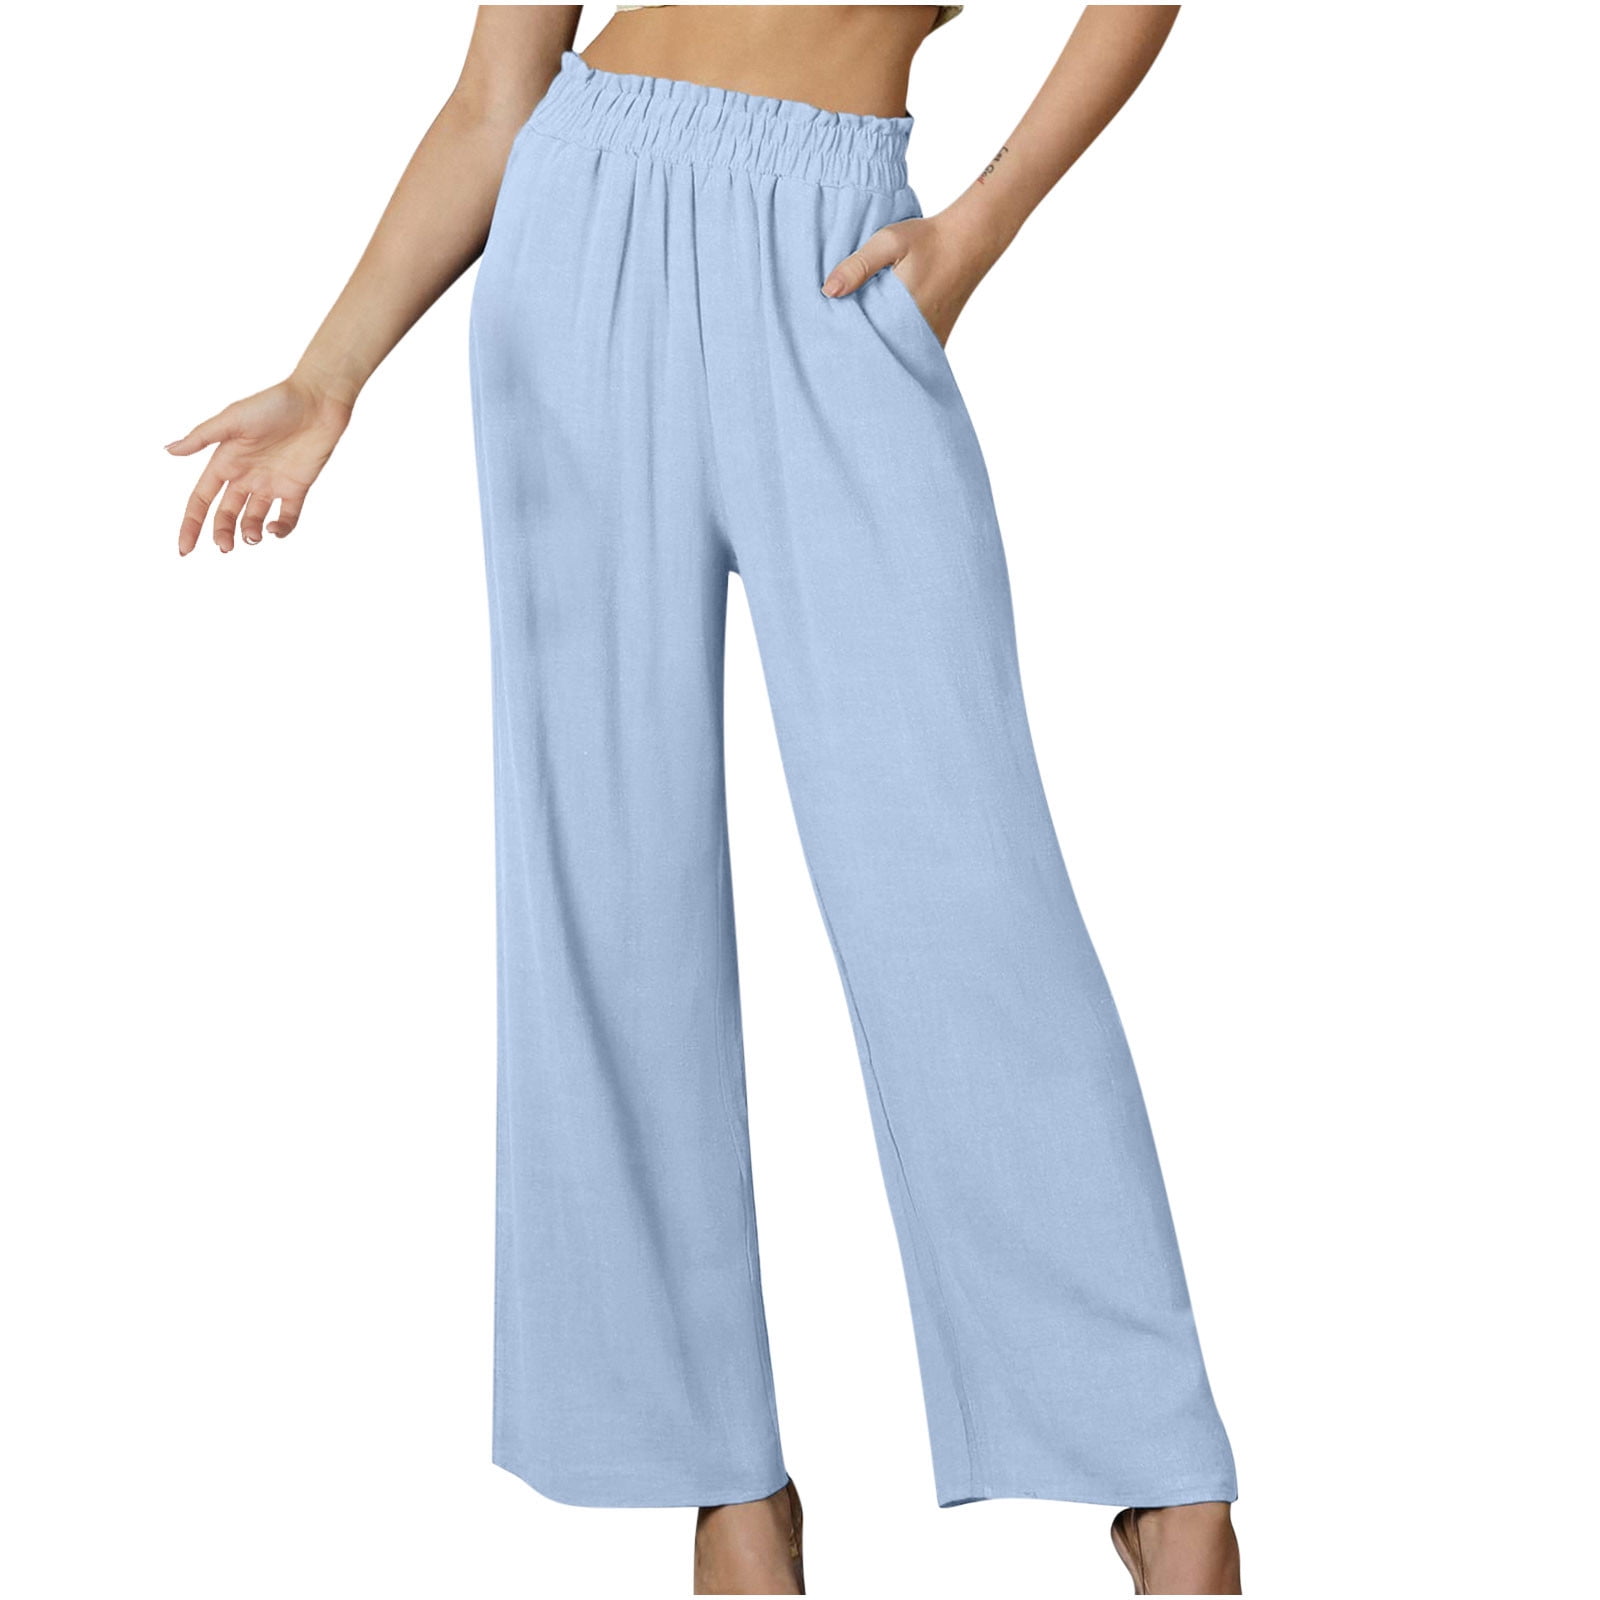 Bigersell Solid Blue Pant for Women Full Length Pants Fashion Women's  Casual Elastic Waist Pocket Solid Color Trousers Long Pants Solid Blue Pant  for Ladies 